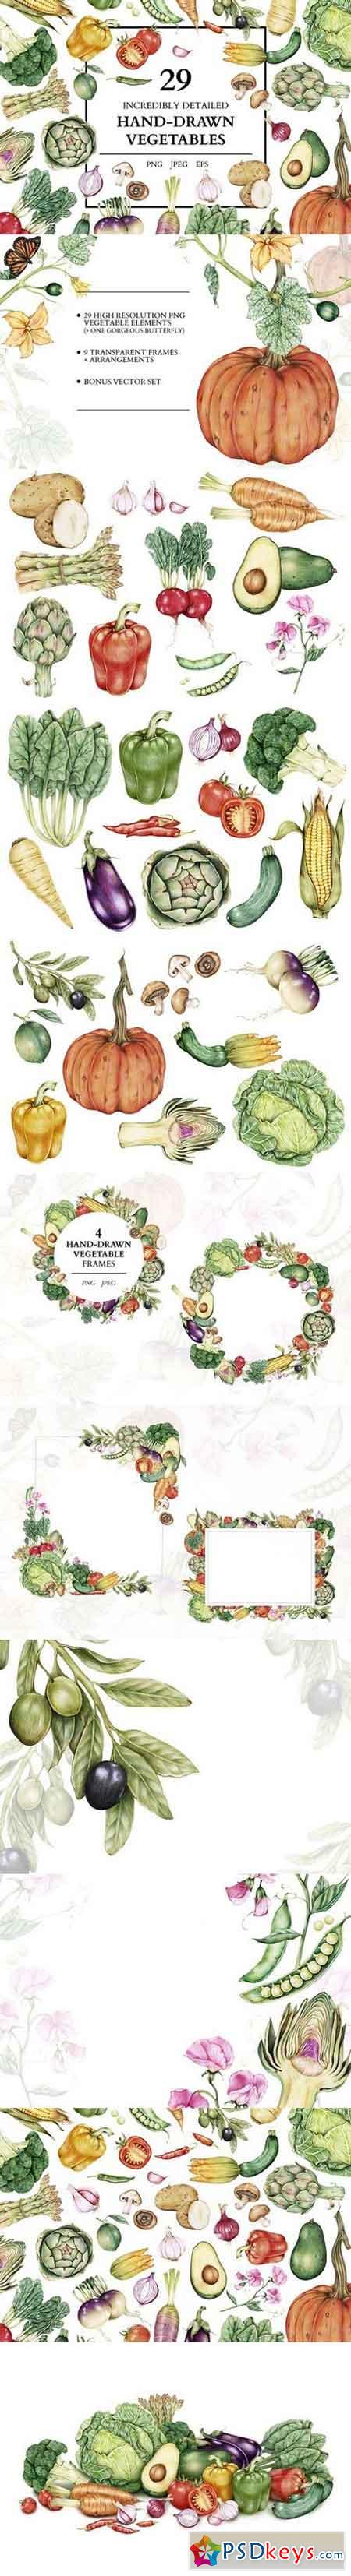 29 Incredible hand-drawn vegetables 1734414